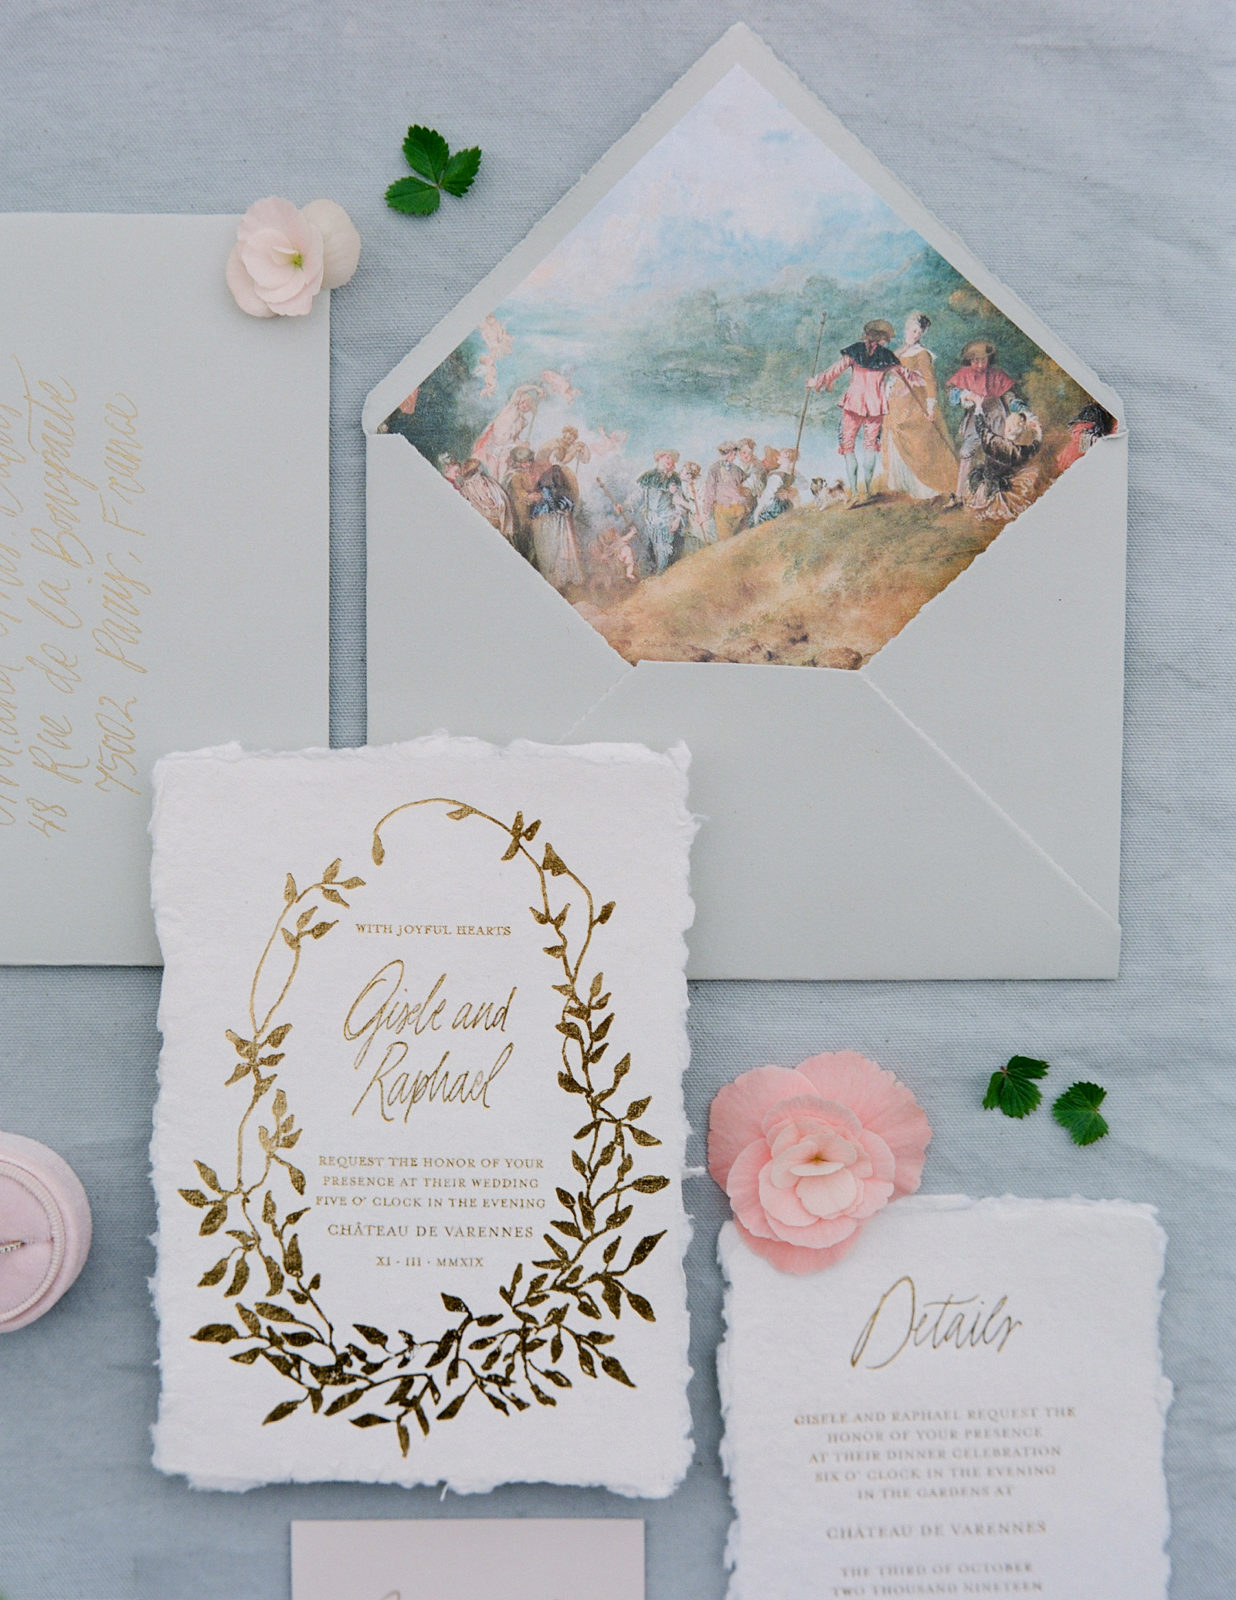 Best Wedding Invitations of 2018 | Fine Art Calligraphy | Wedding Invitation Inspiration | Handmade Wedding Invitations | Molly Carr Photography | Ink & Press Co | Envelope Liners | French Wedding Invitation | Chateau de Varennes Wedding Invitation